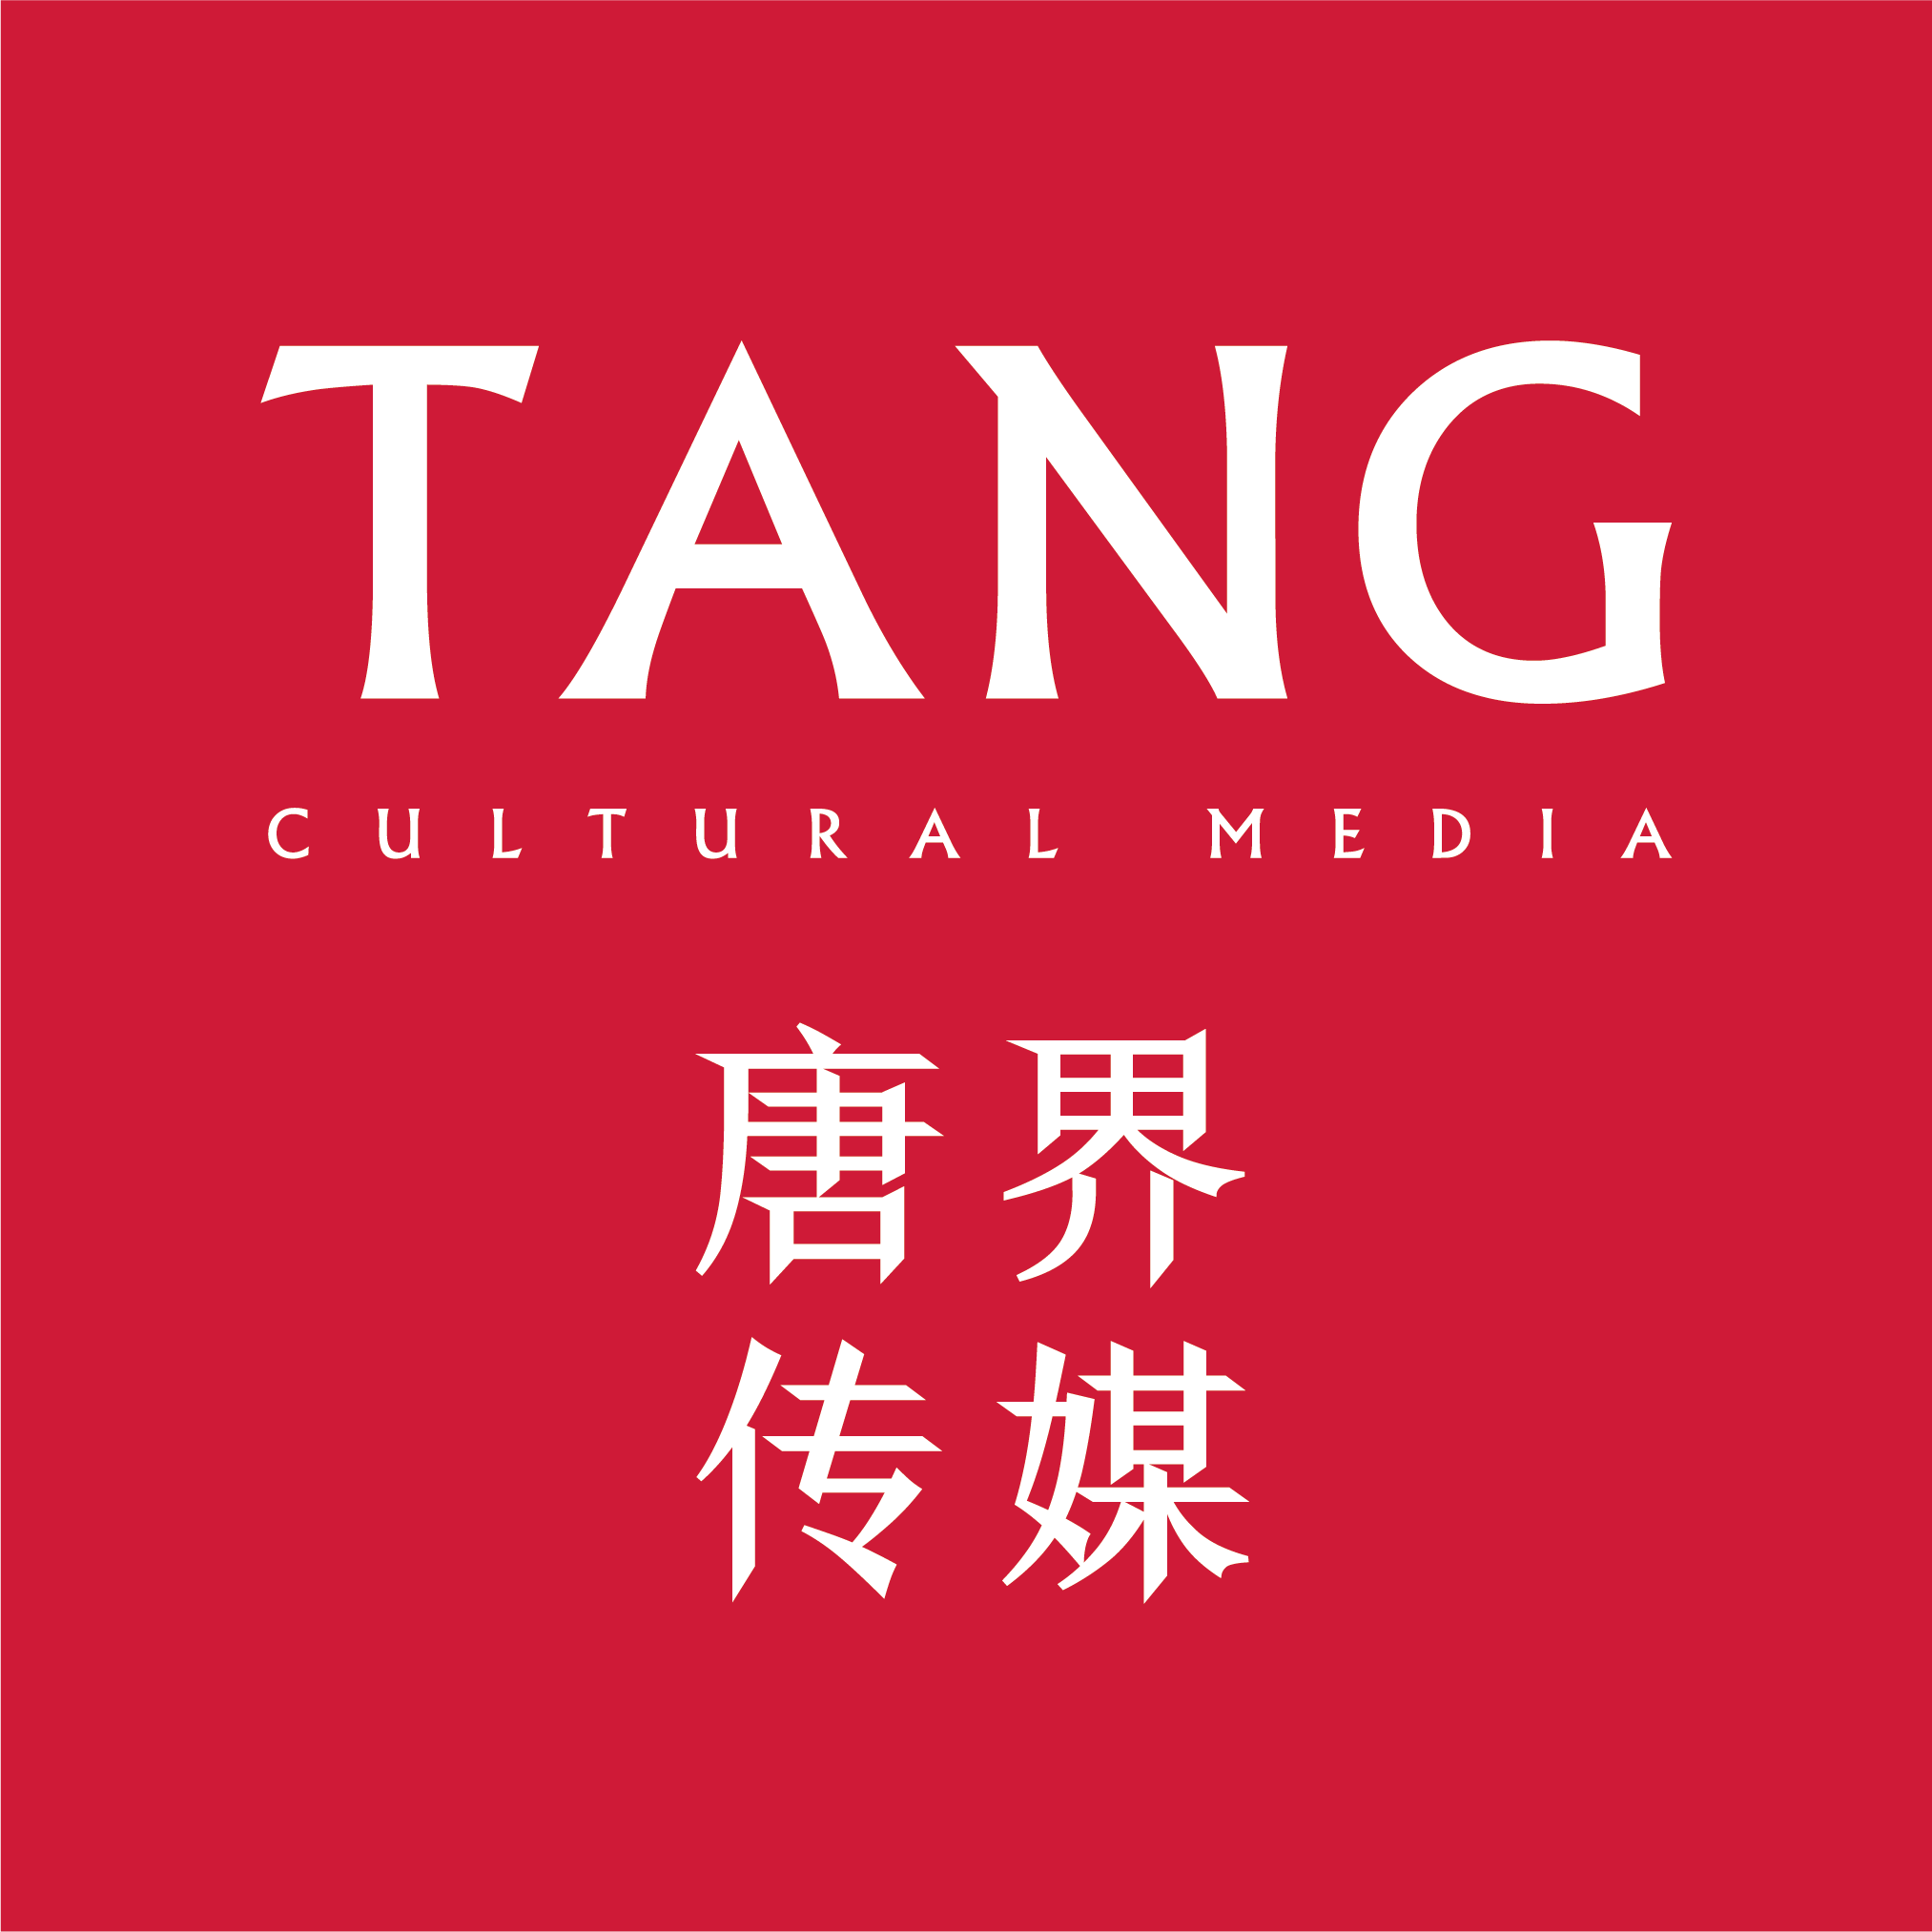 Tang Cultural Media and American Daily Newswire Announce Strategic Partnership Renewal